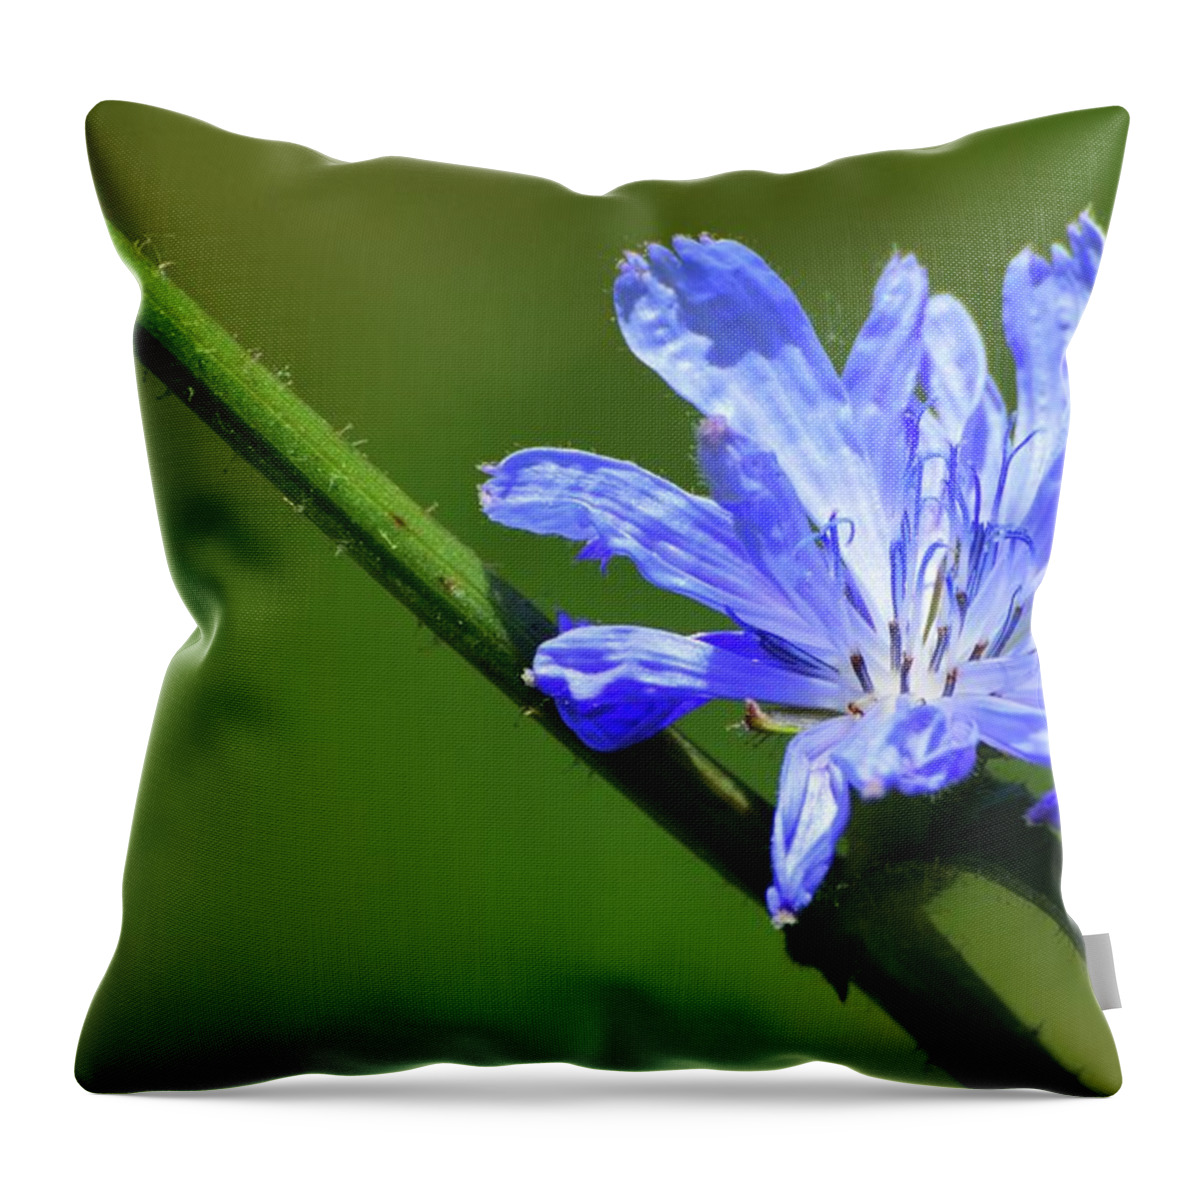 Abstract Throw Pillow featuring the photograph Opening Blue Chicory Two by Lyle Crump